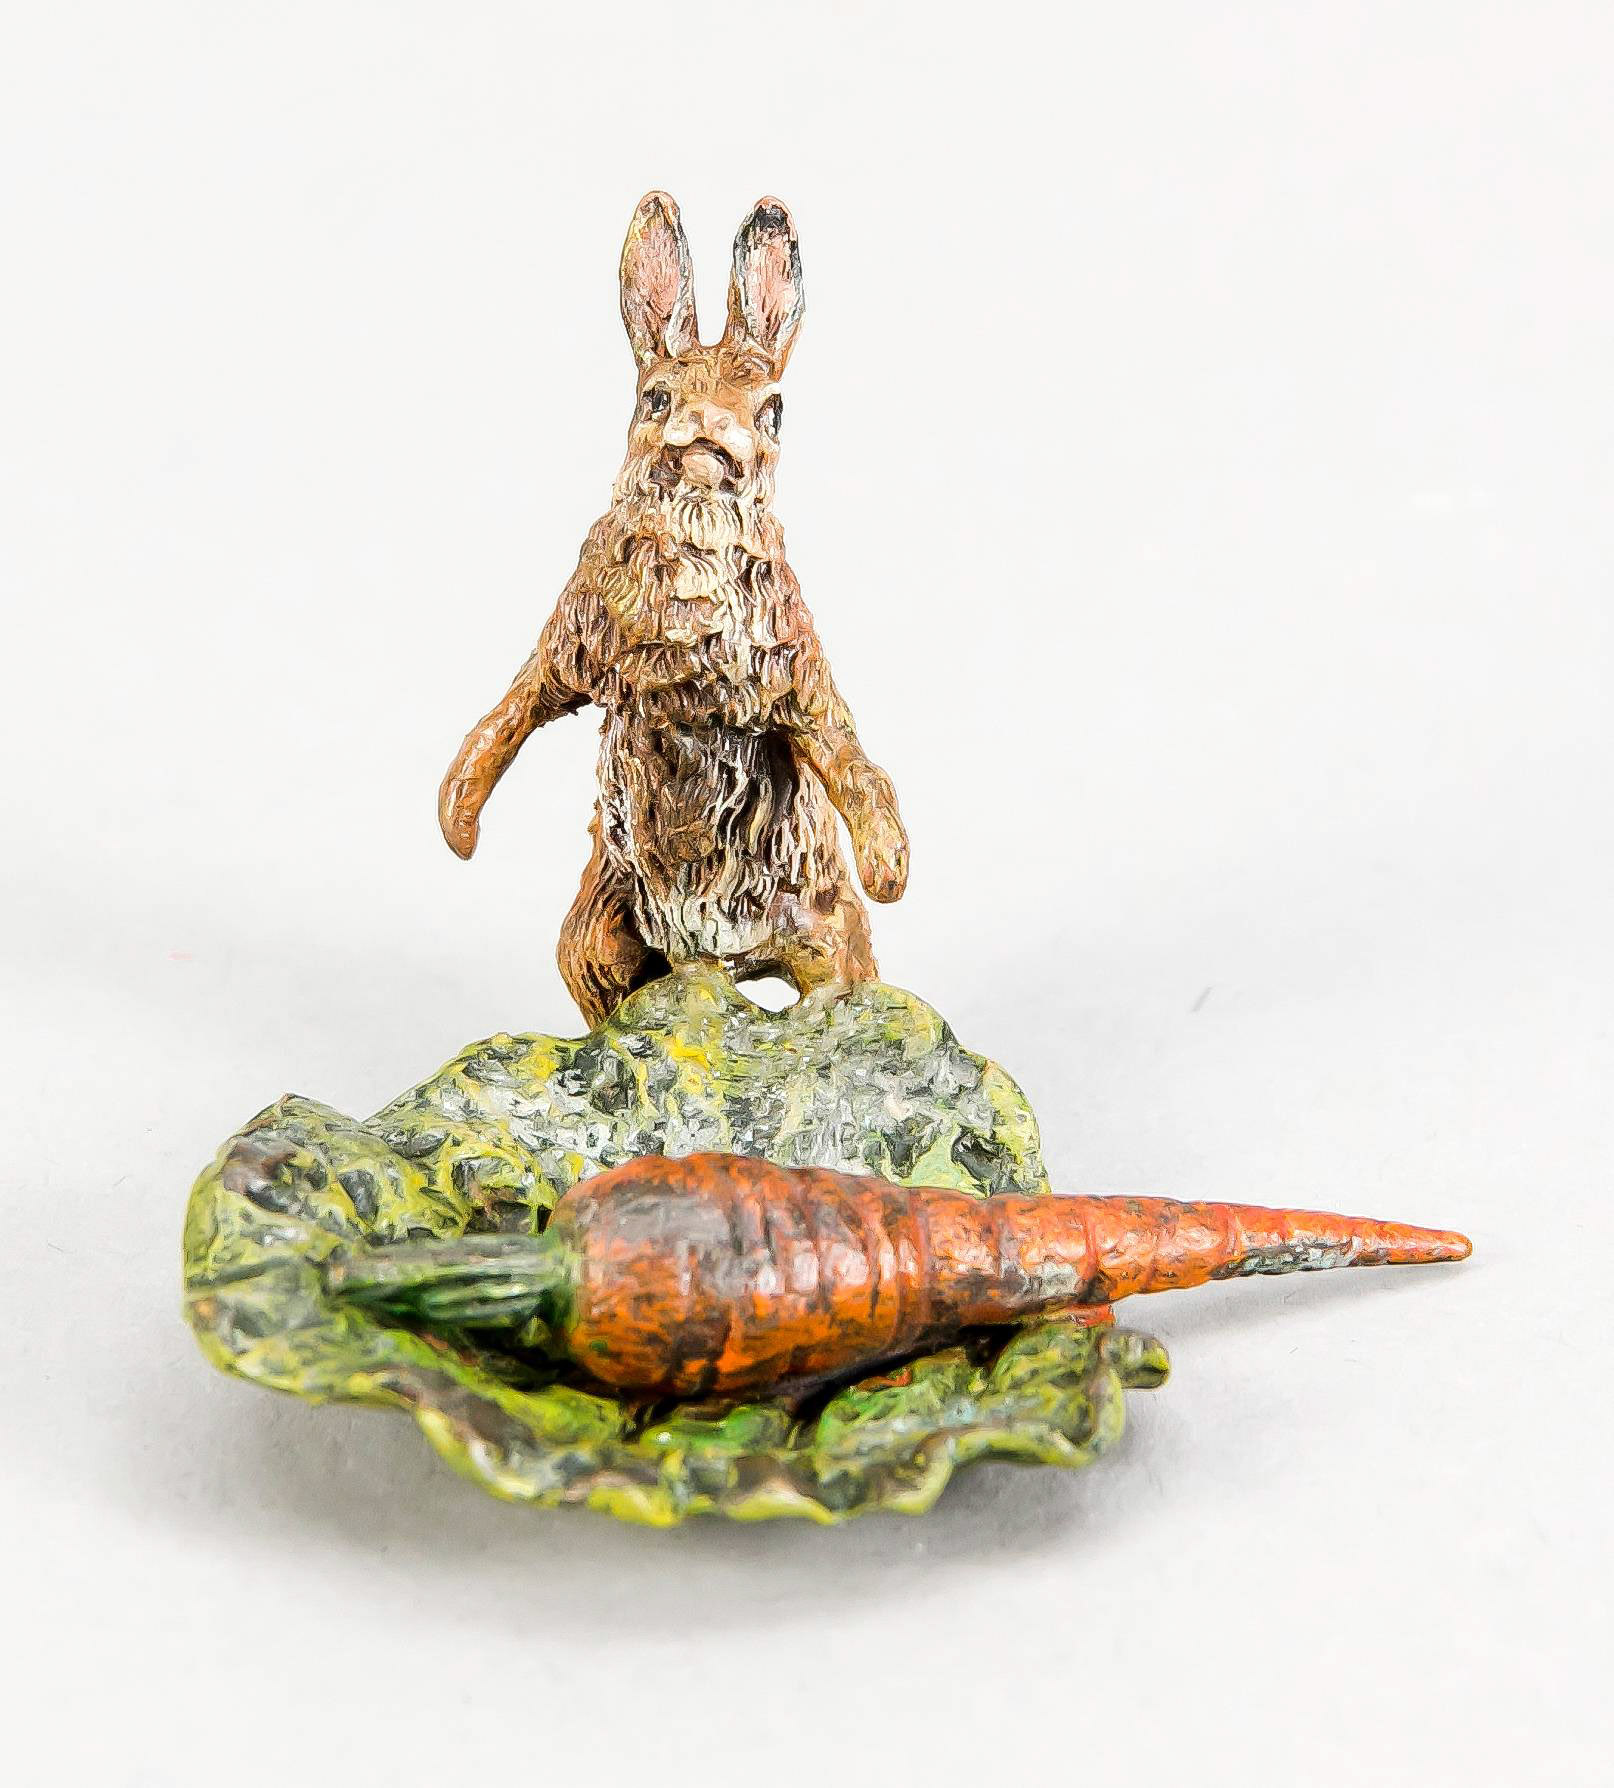 Viennese bronze, 20th c., hare with carrot on a large leaf, polychrome cold-painted bronze,